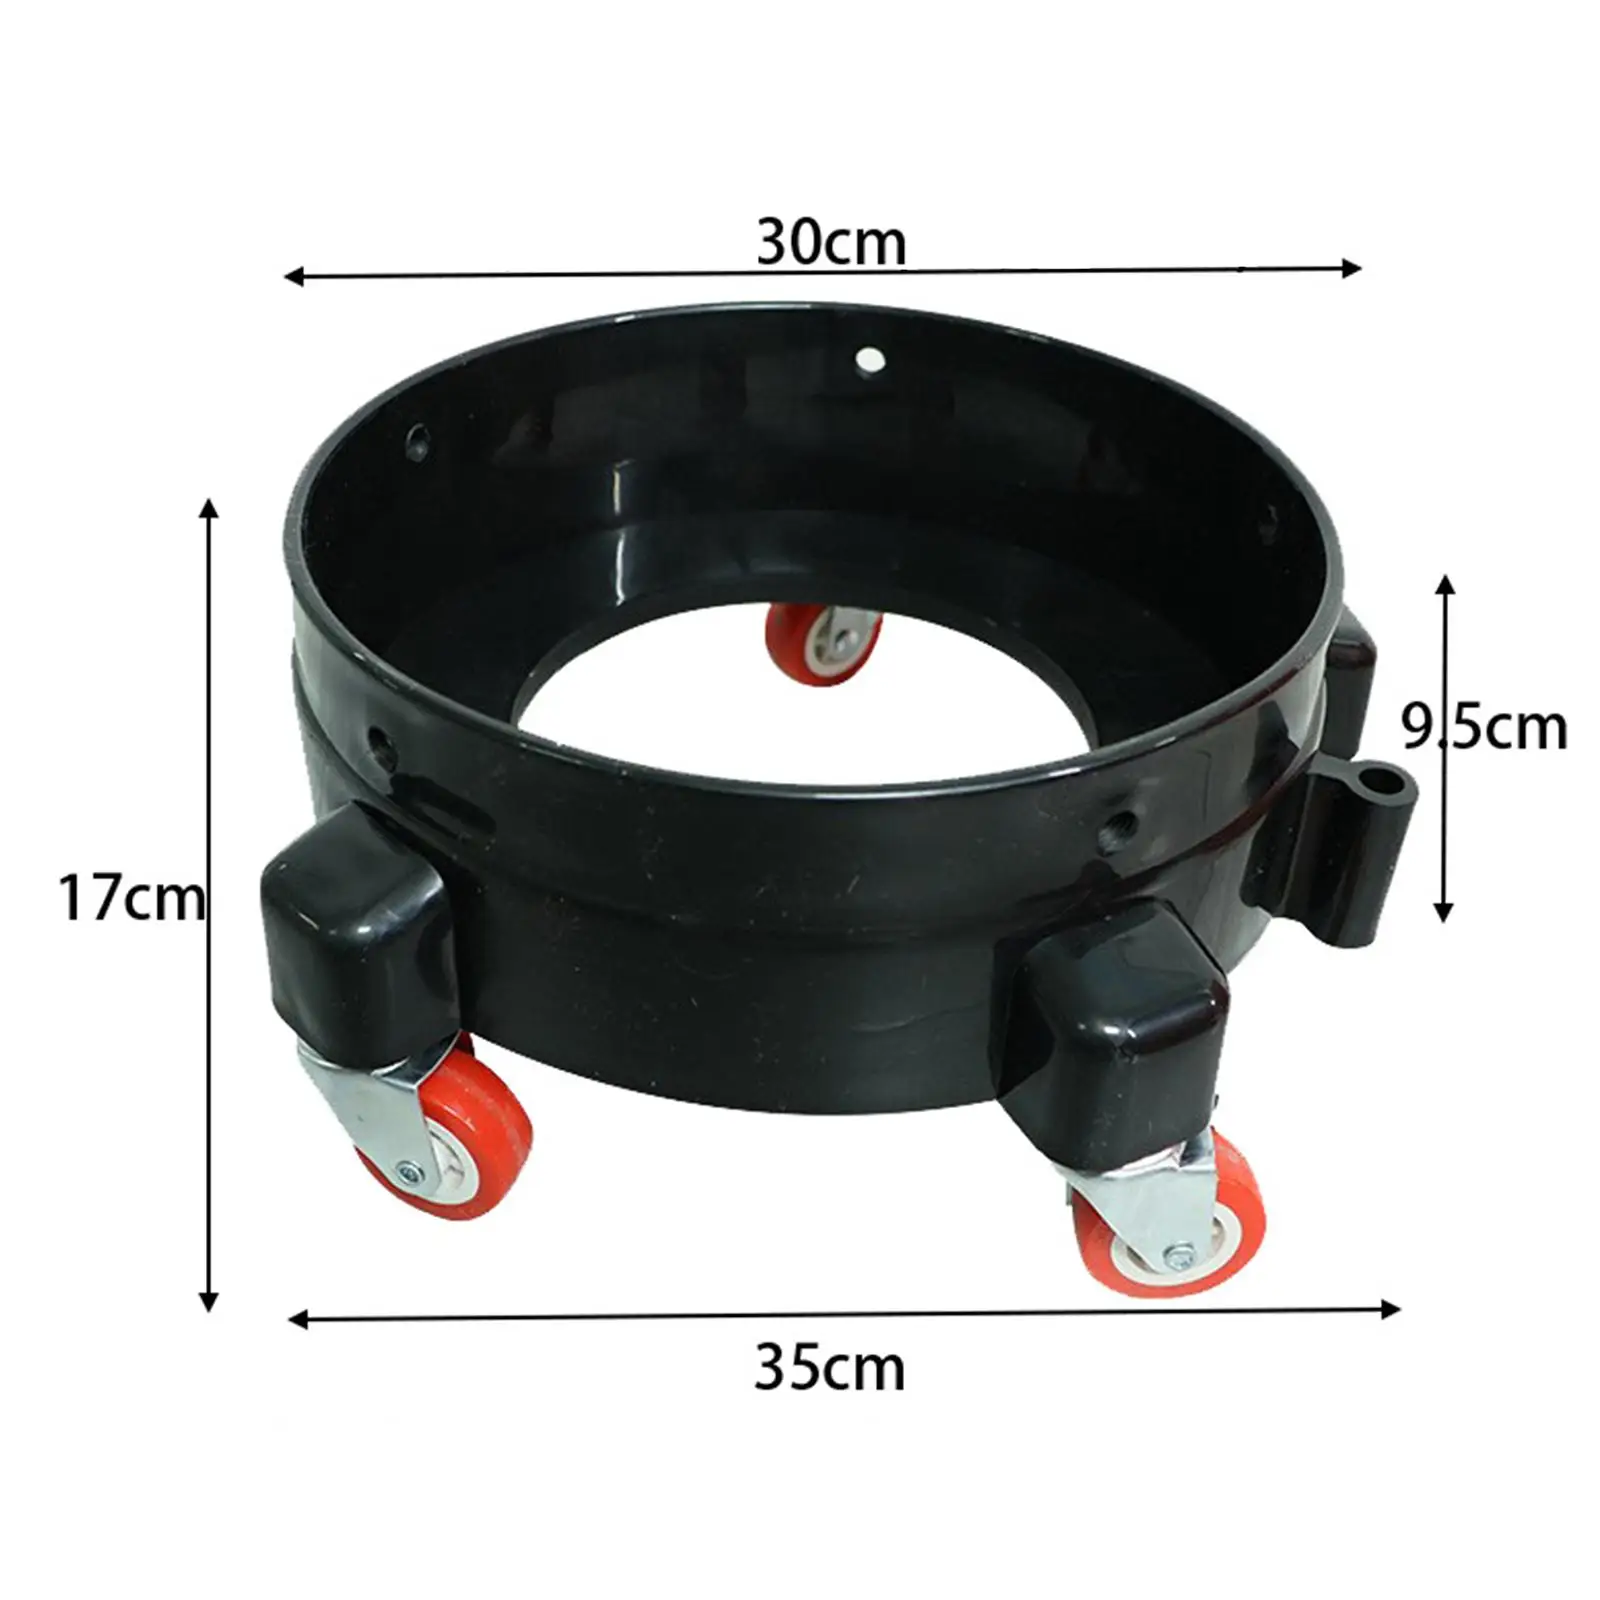 Car Wash Rolling Bucket Dolly Schools Garage Vehicle Care Swivel Casters